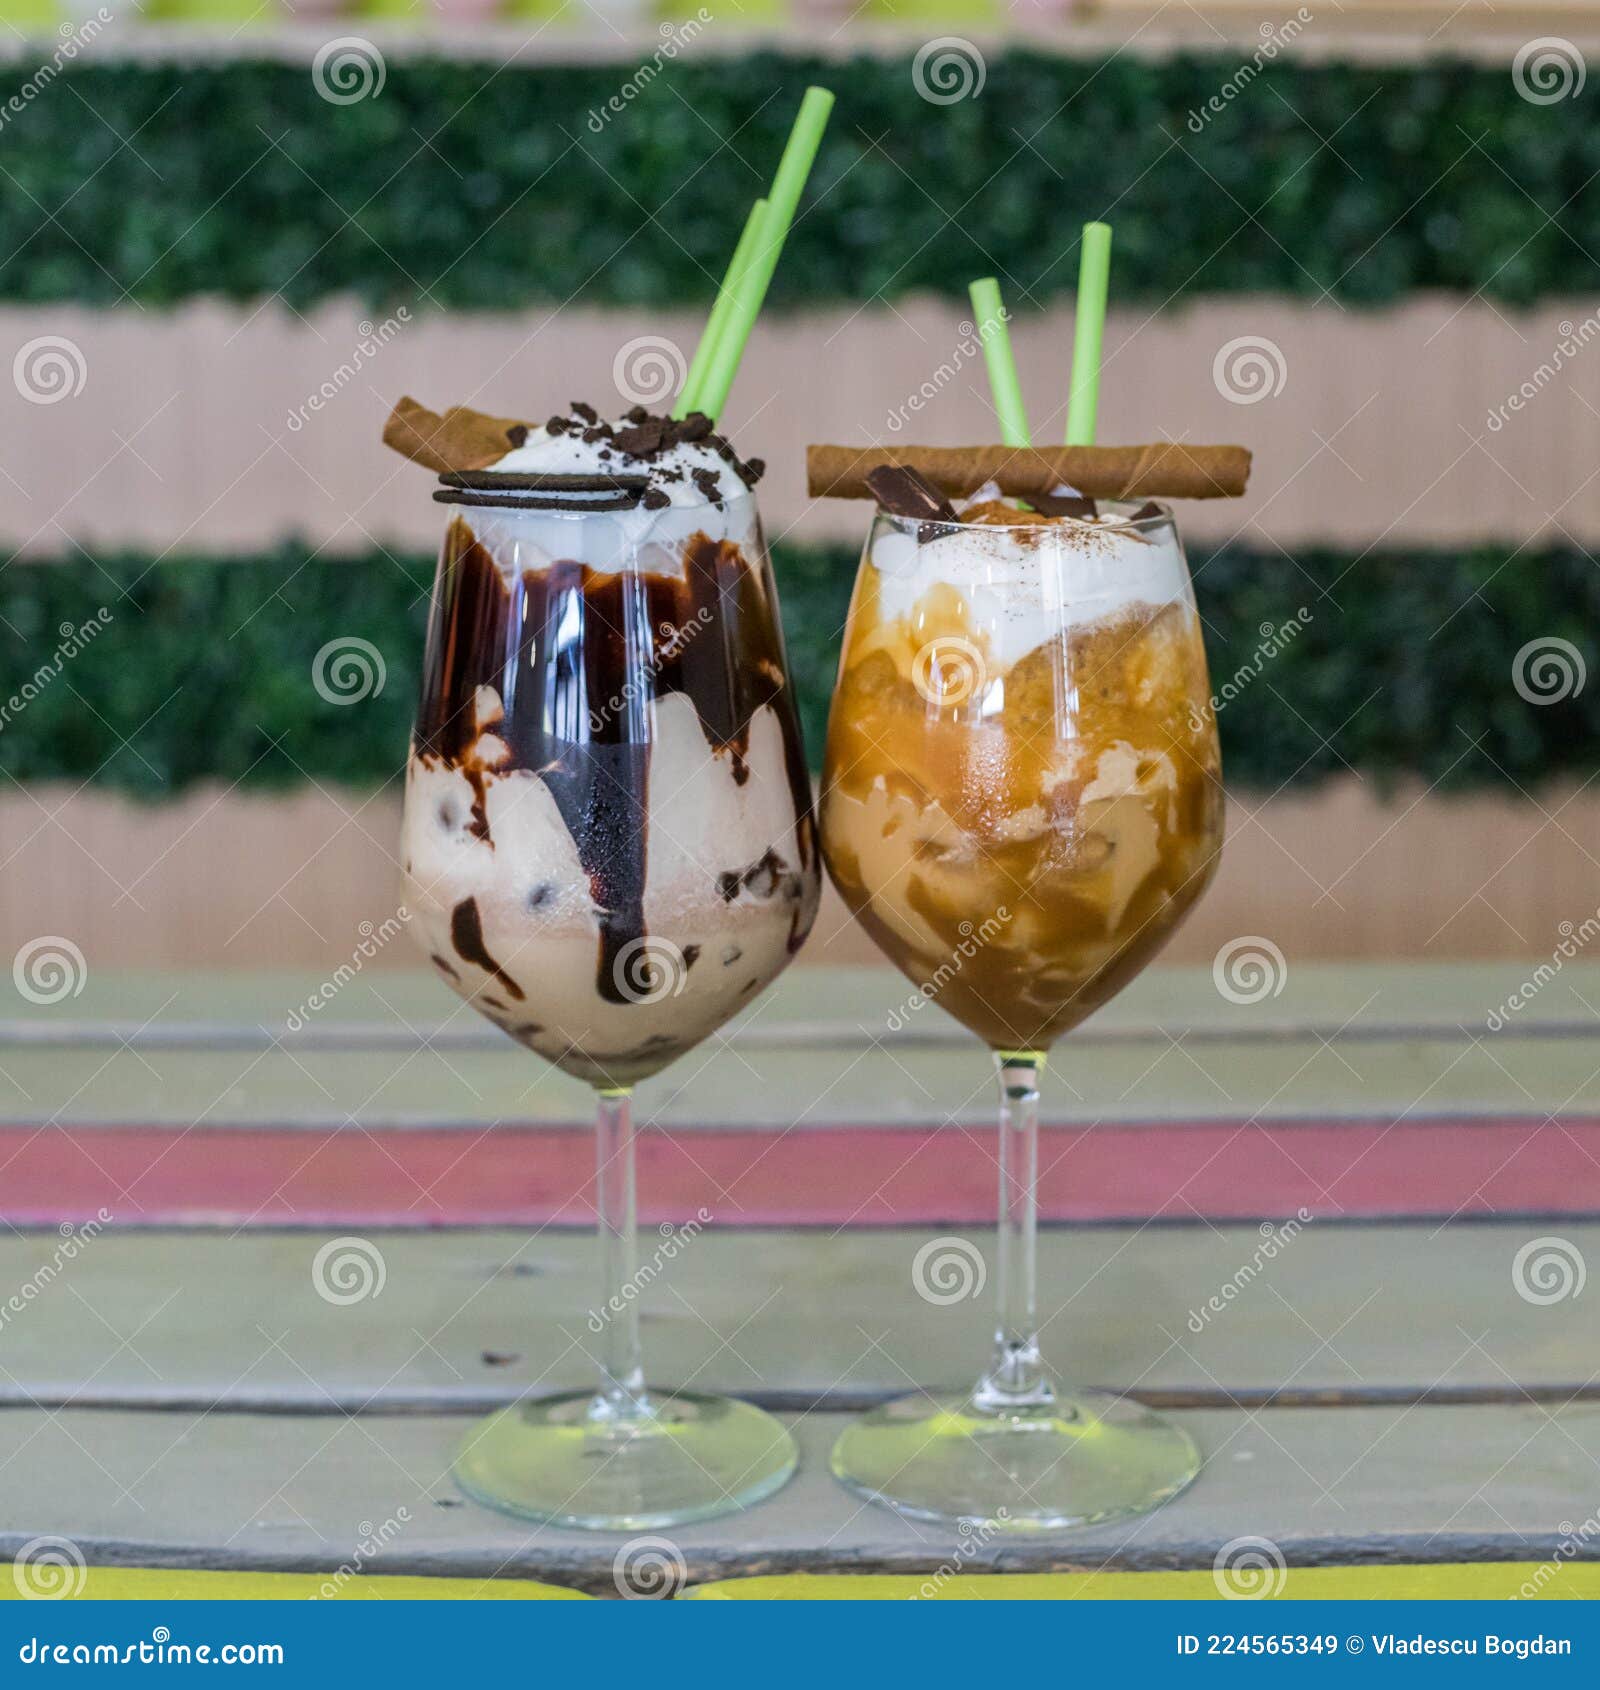 chocolate and caramel cafe frappe